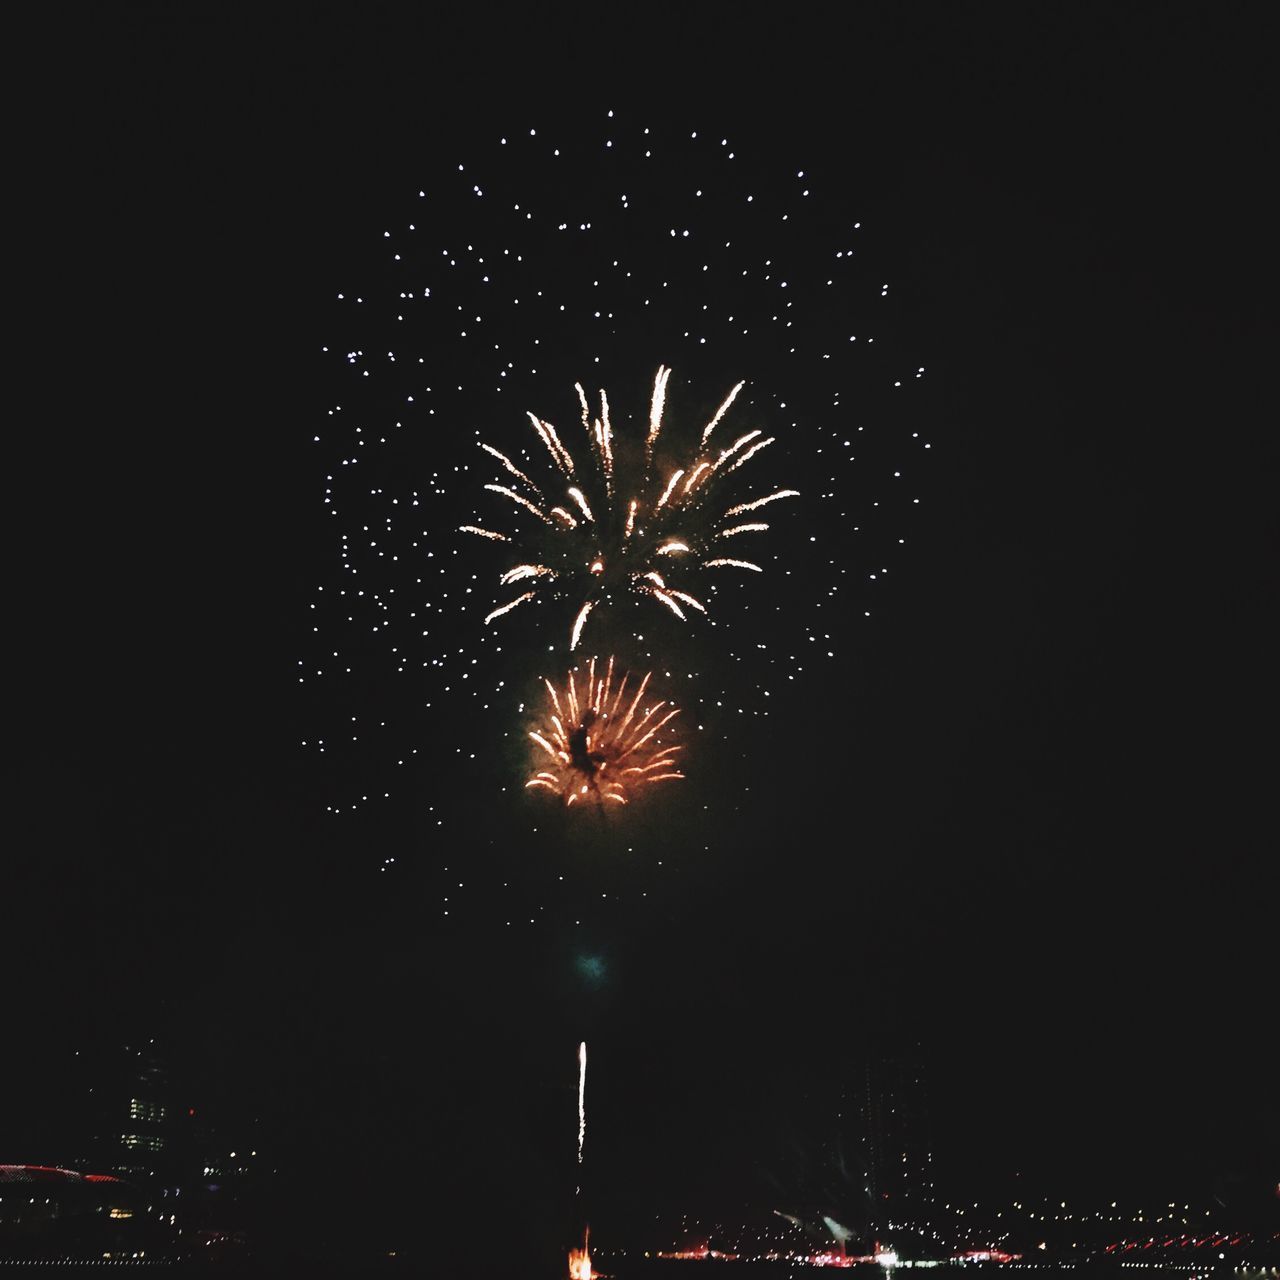 night, firework display, illuminated, exploding, celebration, long exposure, firework - man made object, motion, arts culture and entertainment, sparks, glowing, event, blurred motion, firework, low angle view, entertainment, sky, celebration event, multi colored, fire - natural phenomenon